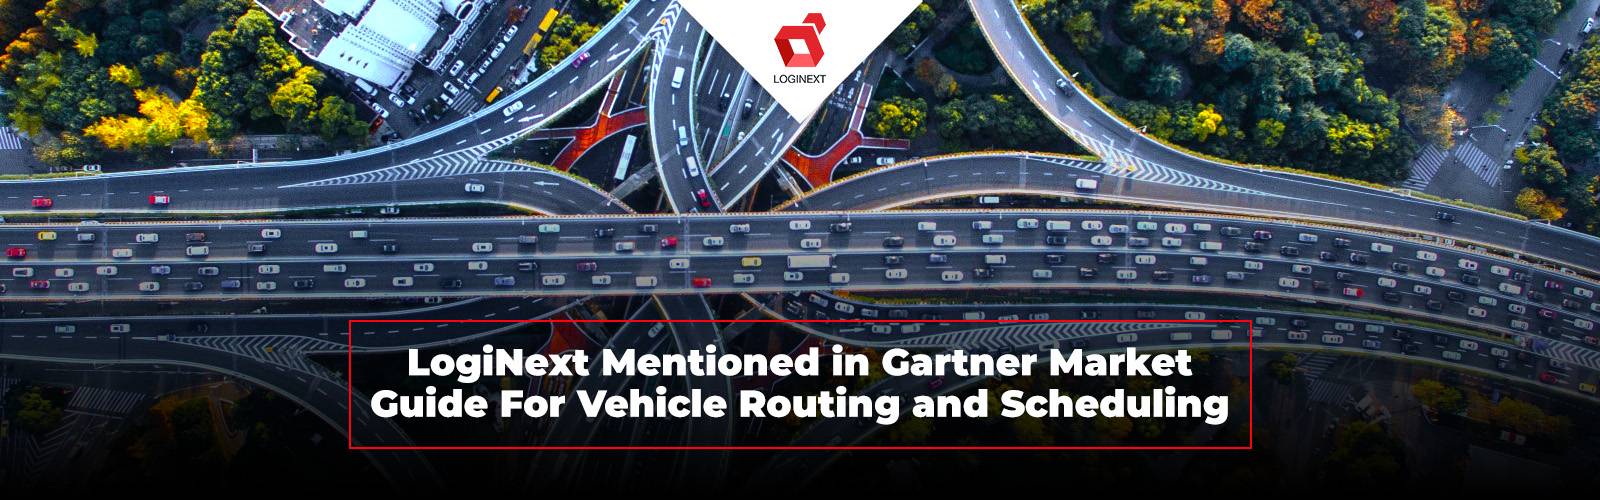 LogiNext Mentioned Sample Vendor in Vehicle Routing and Scheduling Market Report Gartner